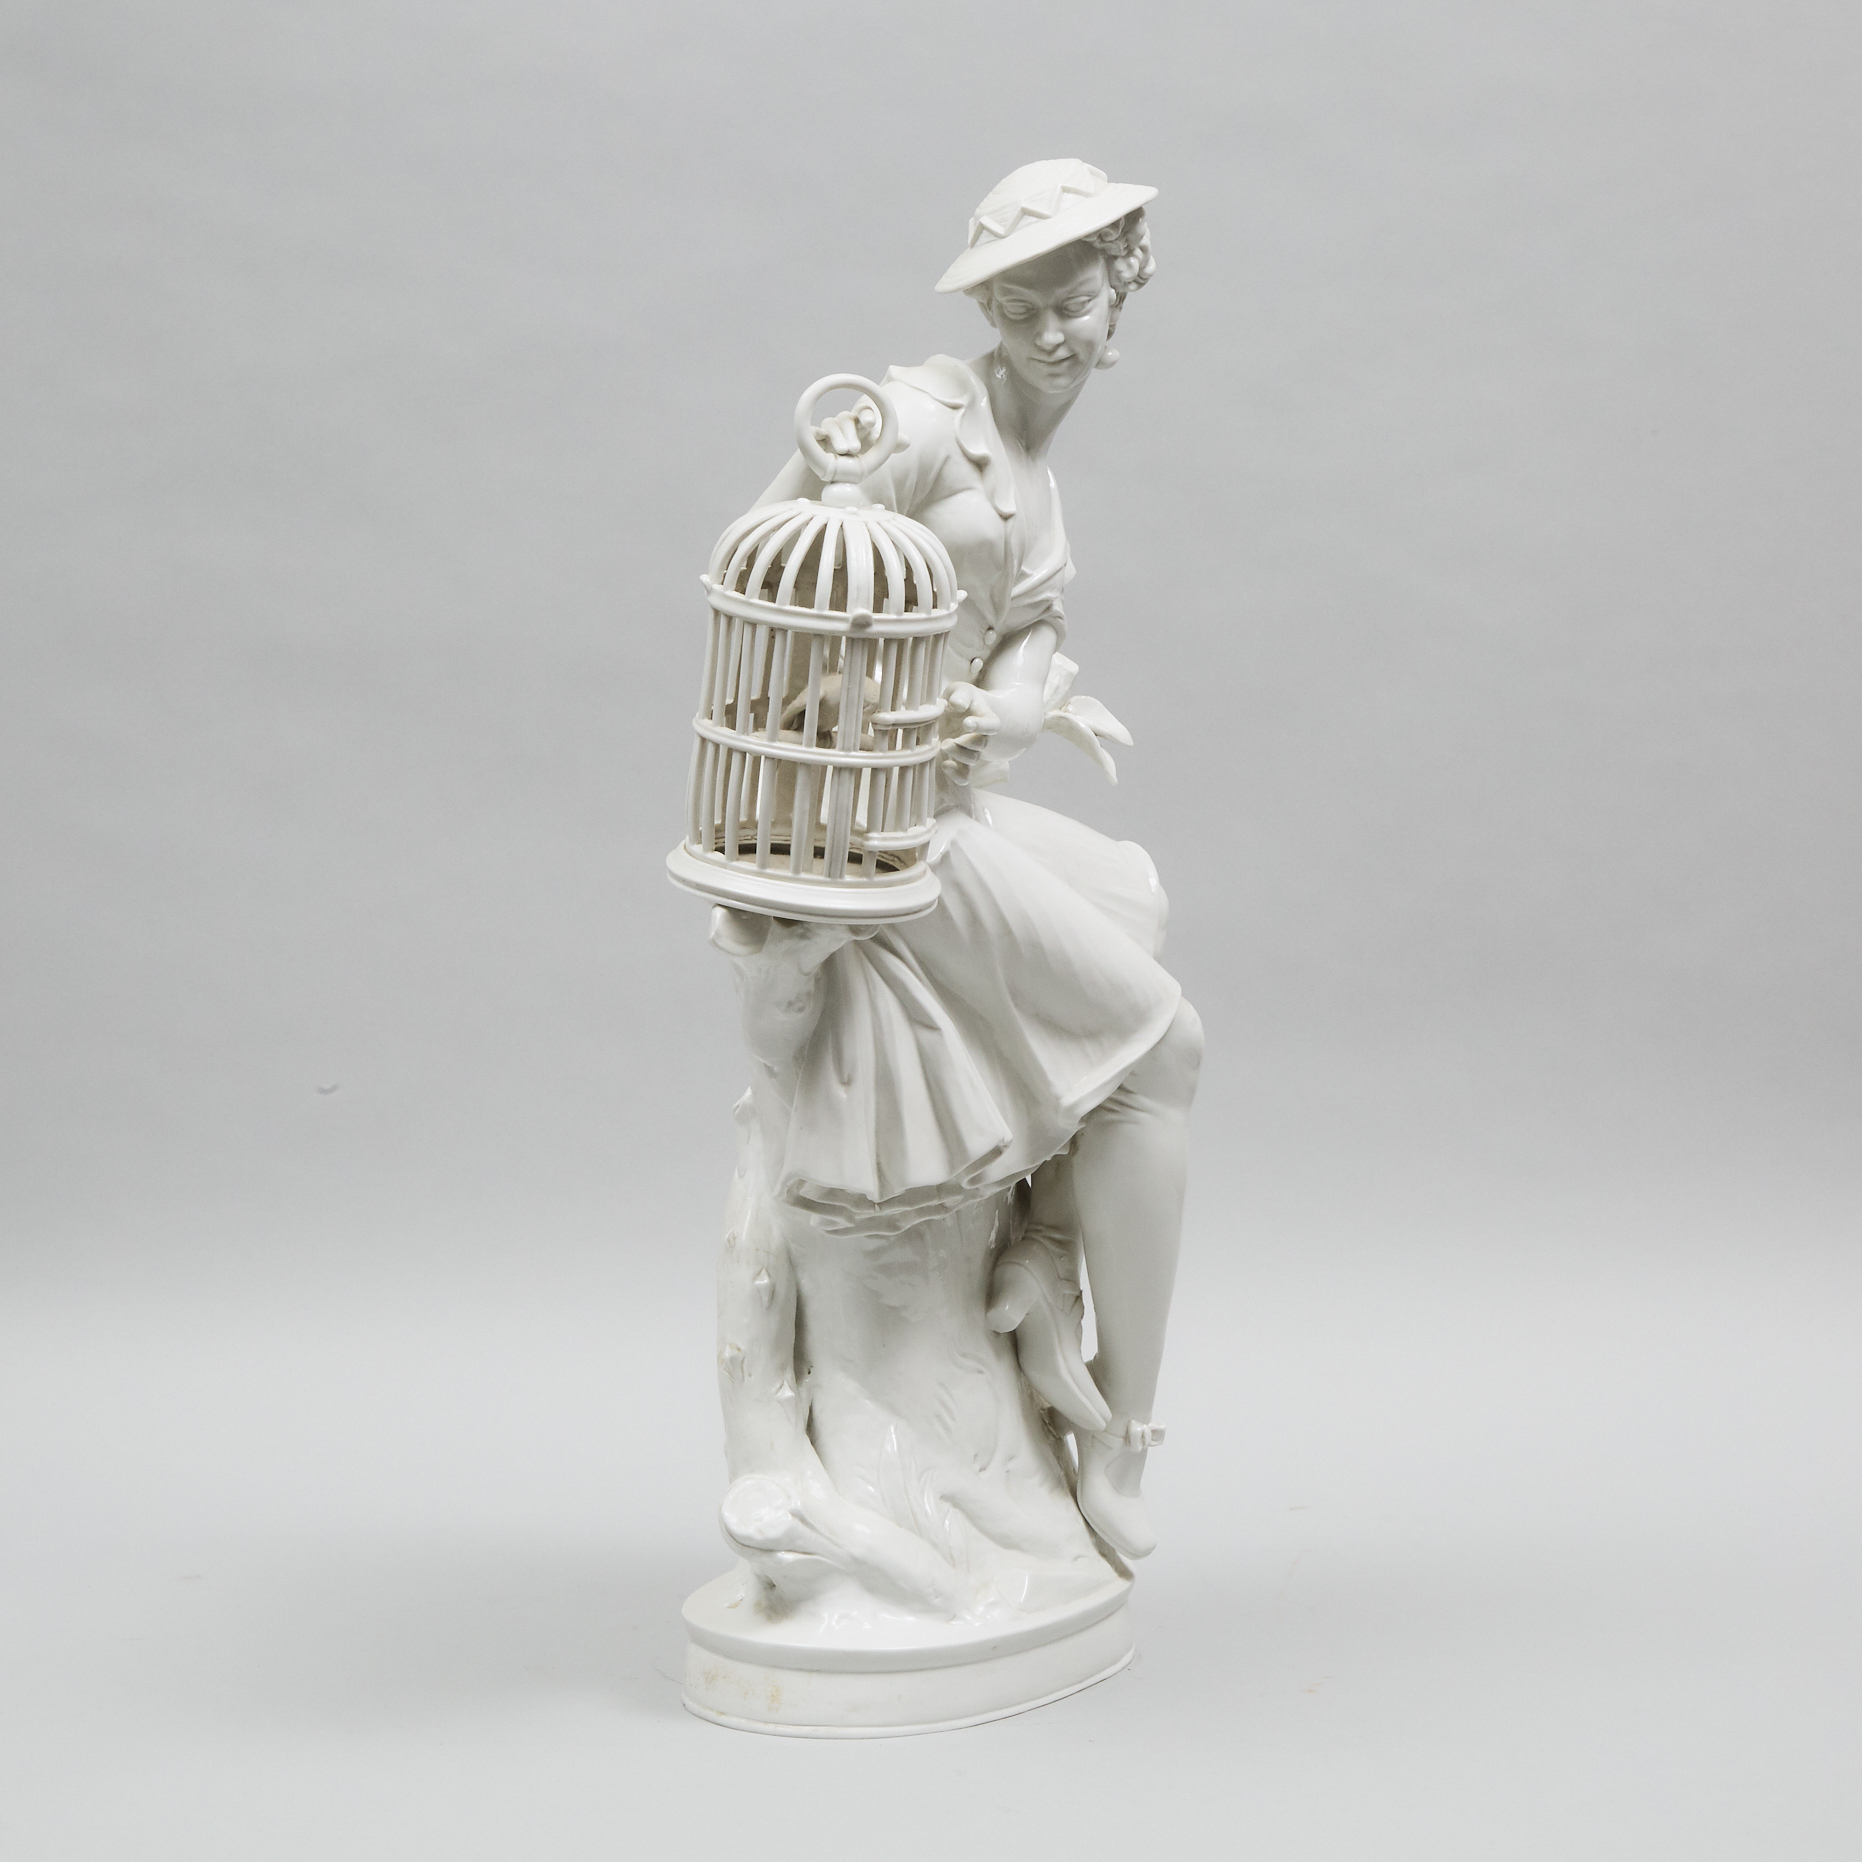 Rosenthal White Glazed Large Figure, 'Vöglein Flieg', of a Seated Woman with Caged Bird, Hugo Meisel, mid-20th century